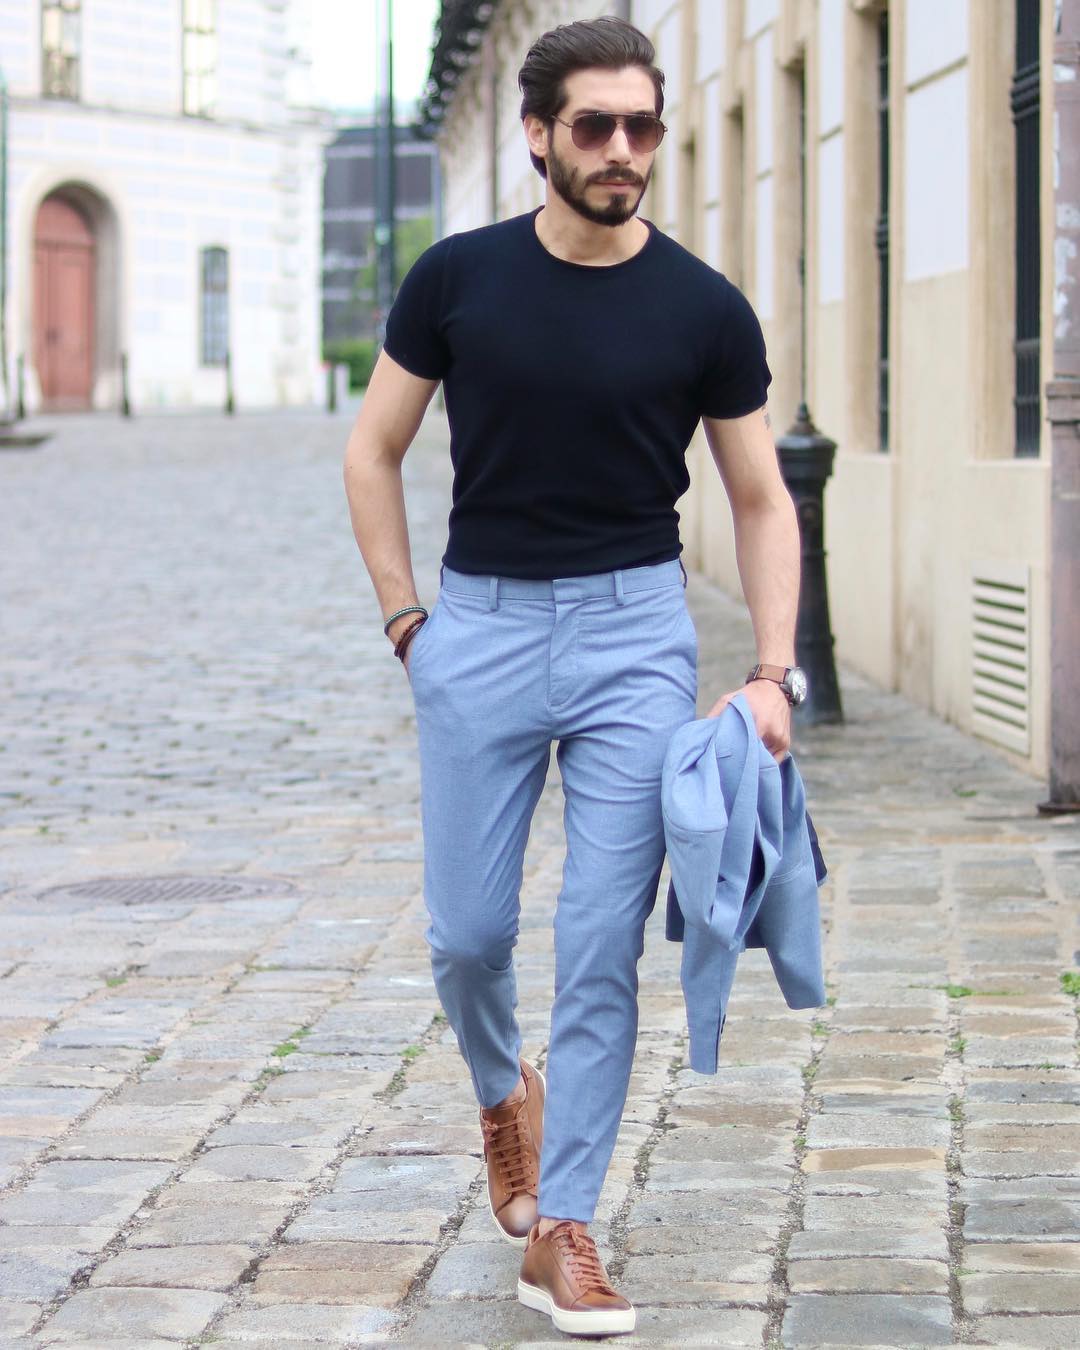 5 Pants & T-shirt Outfits For Men #casualstyle #mensfashion # ...